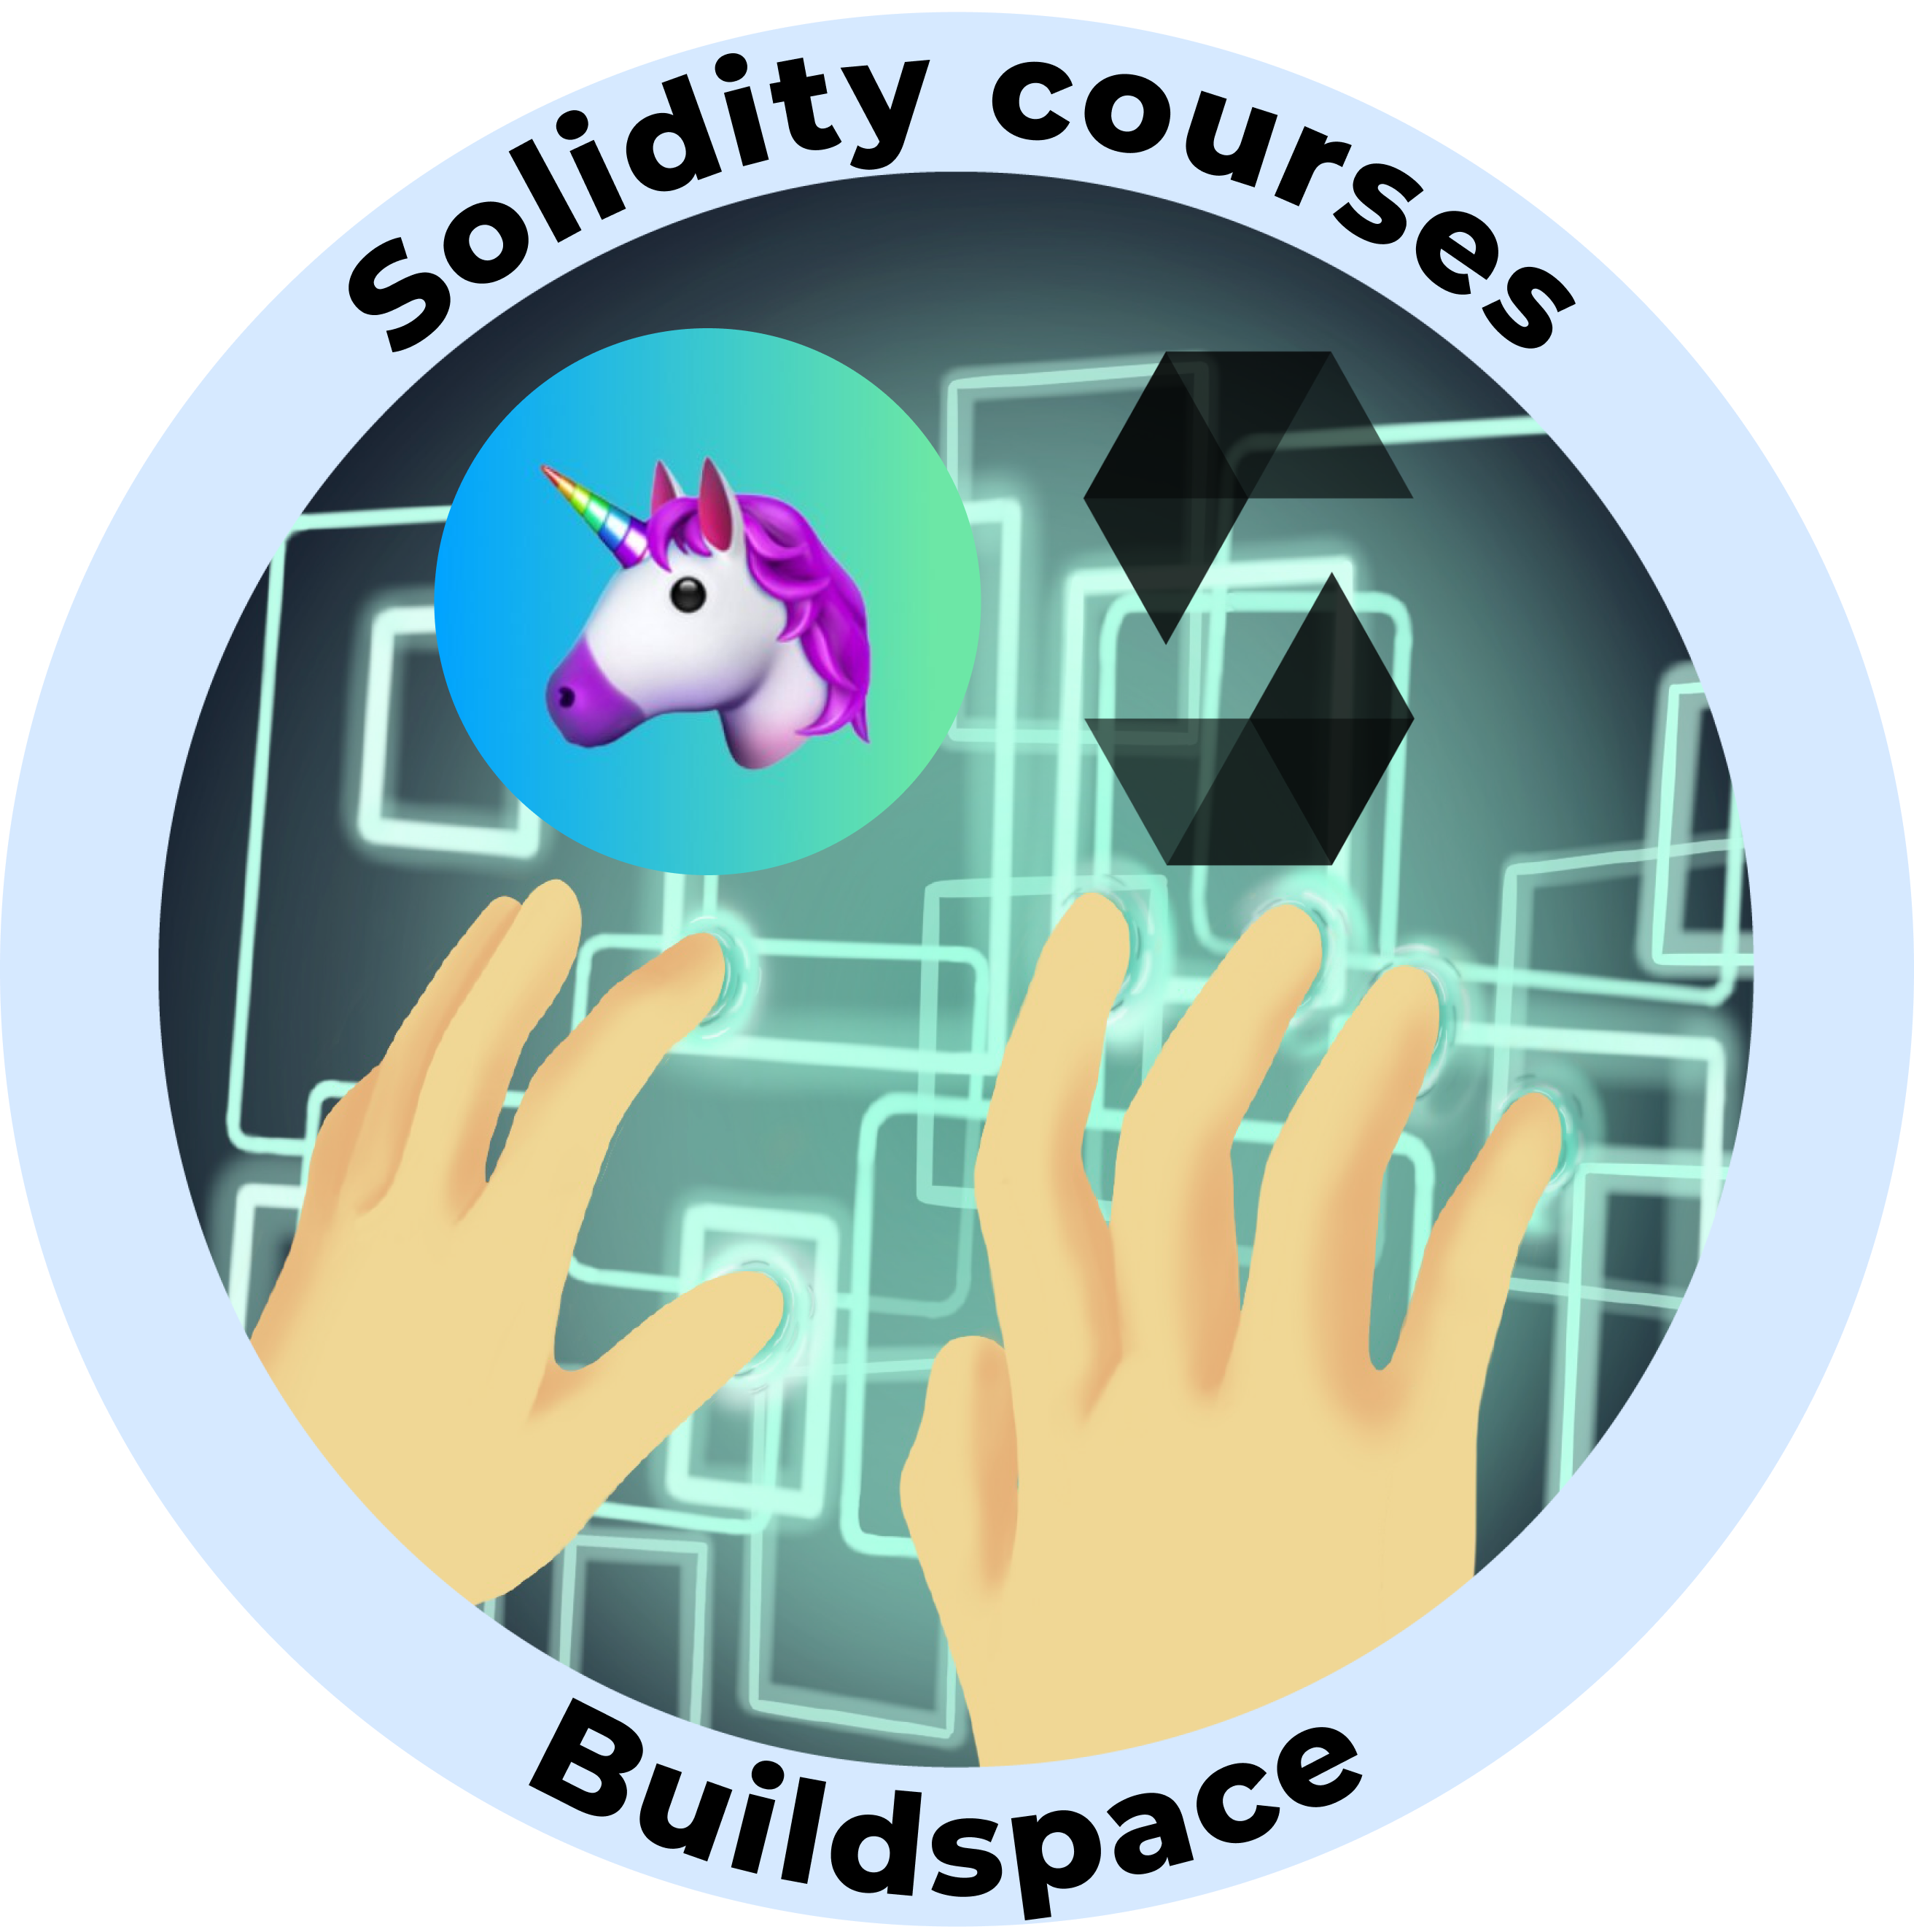 Web3 Badge | Solidity Courses : Buildspace